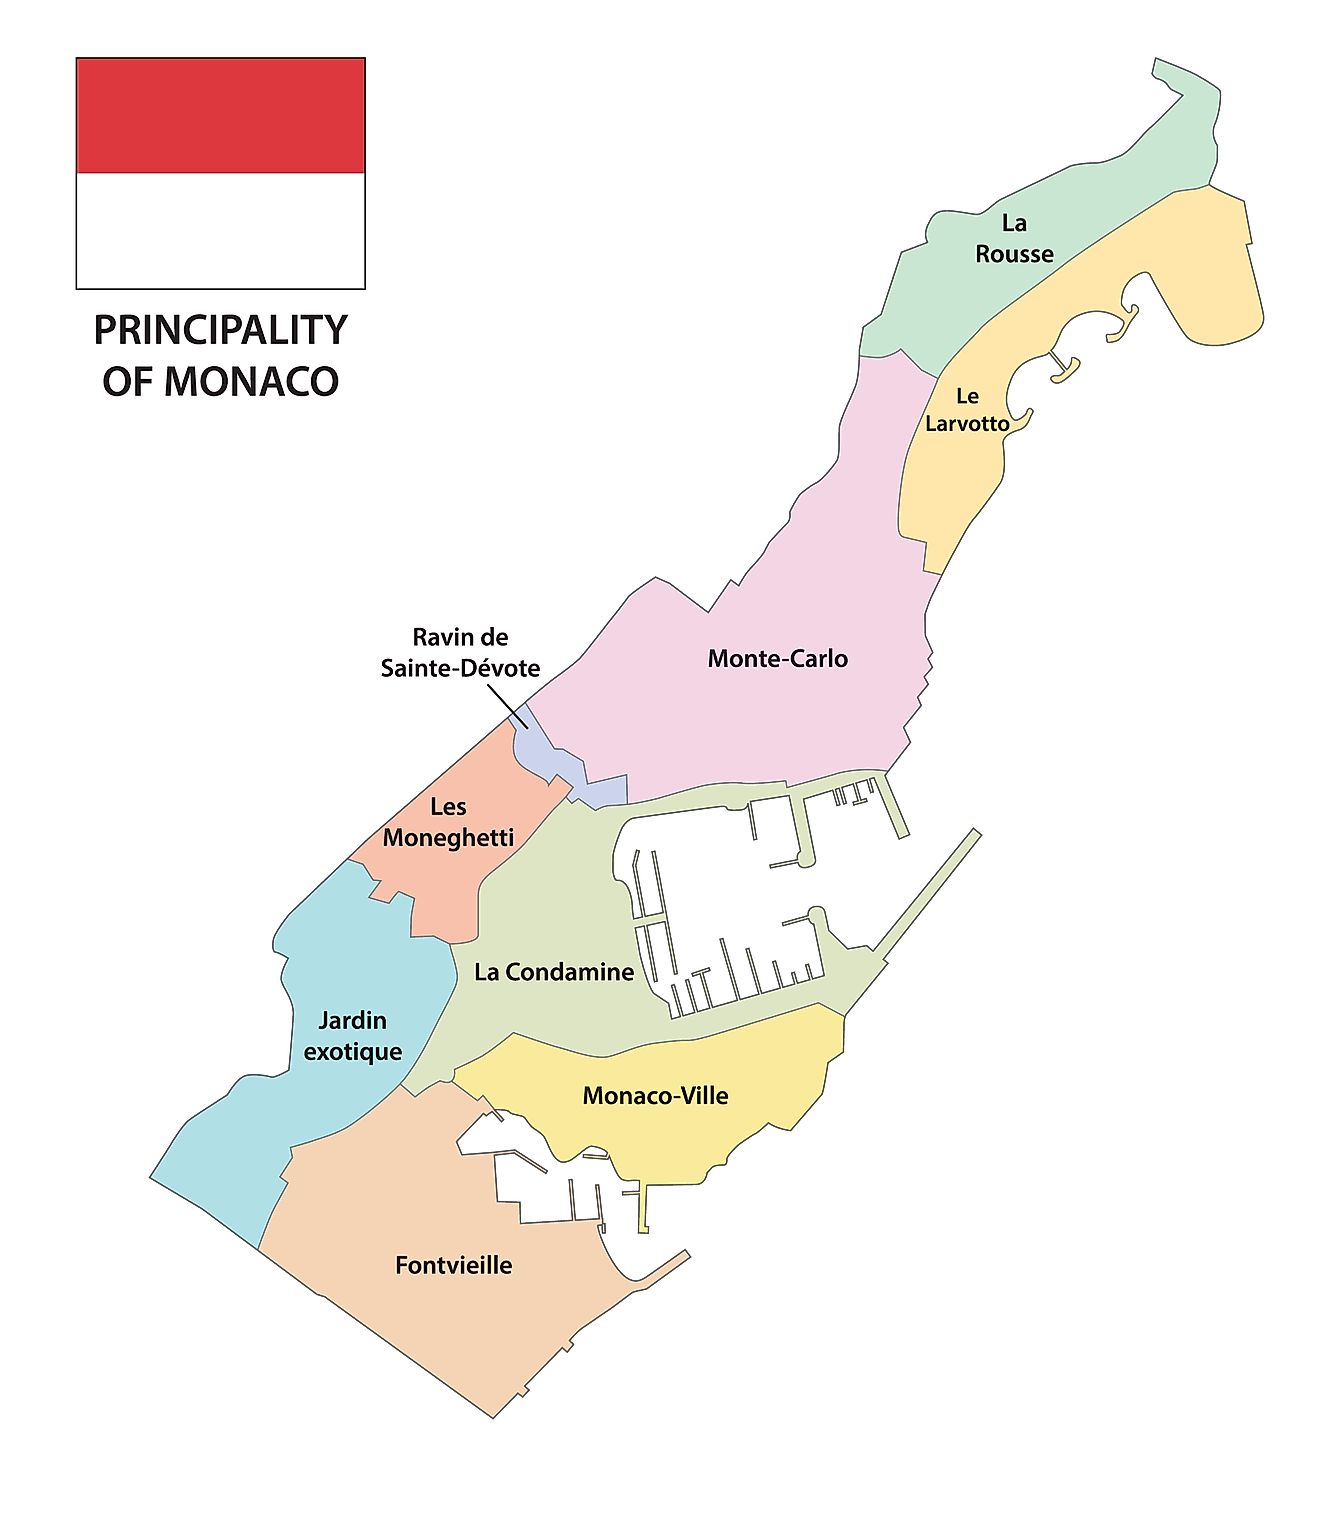 Political Map of Monaco showing its 4 quarters.